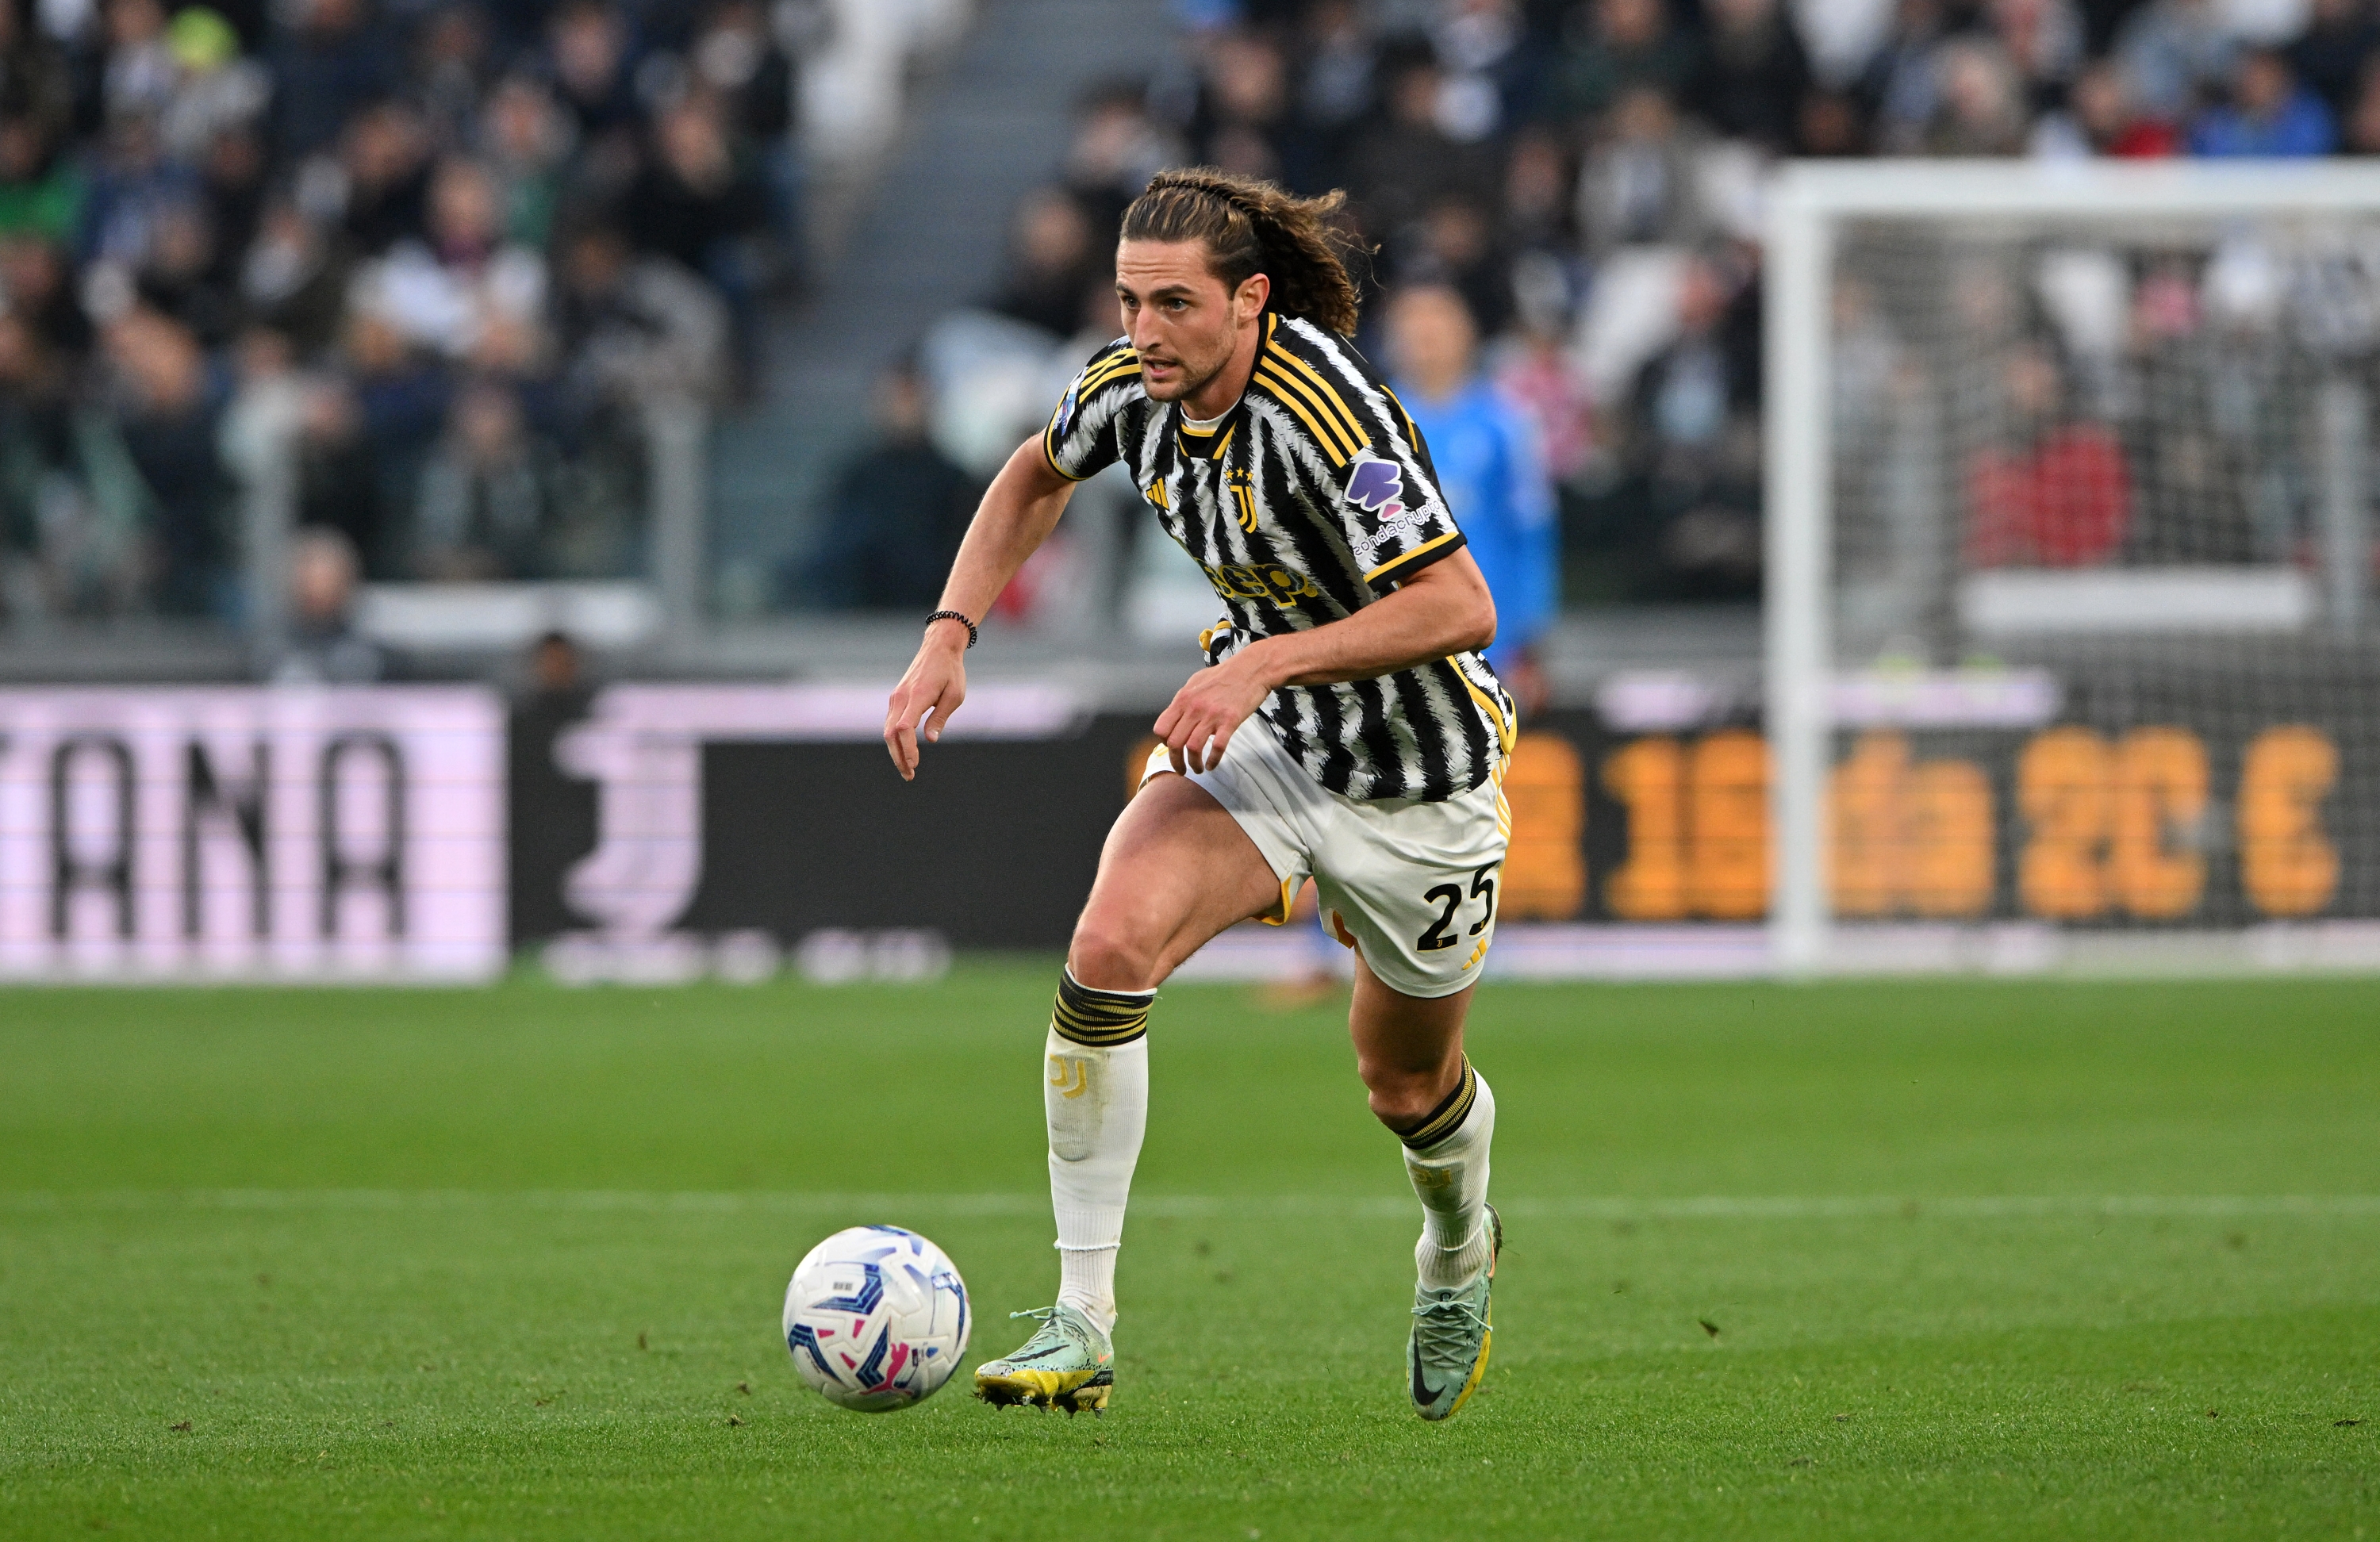 TURIN, ITALY - APRIL 27: Adrien Rabiot of Juventus runs with the ball during the Serie A TIM match between Juventus and AC Milan at Allianz Stadium on April 27, 2024 in Turin, Italy. (Photo by Chris Ricco - Juventus FC/Juventus FC via Getty Images)